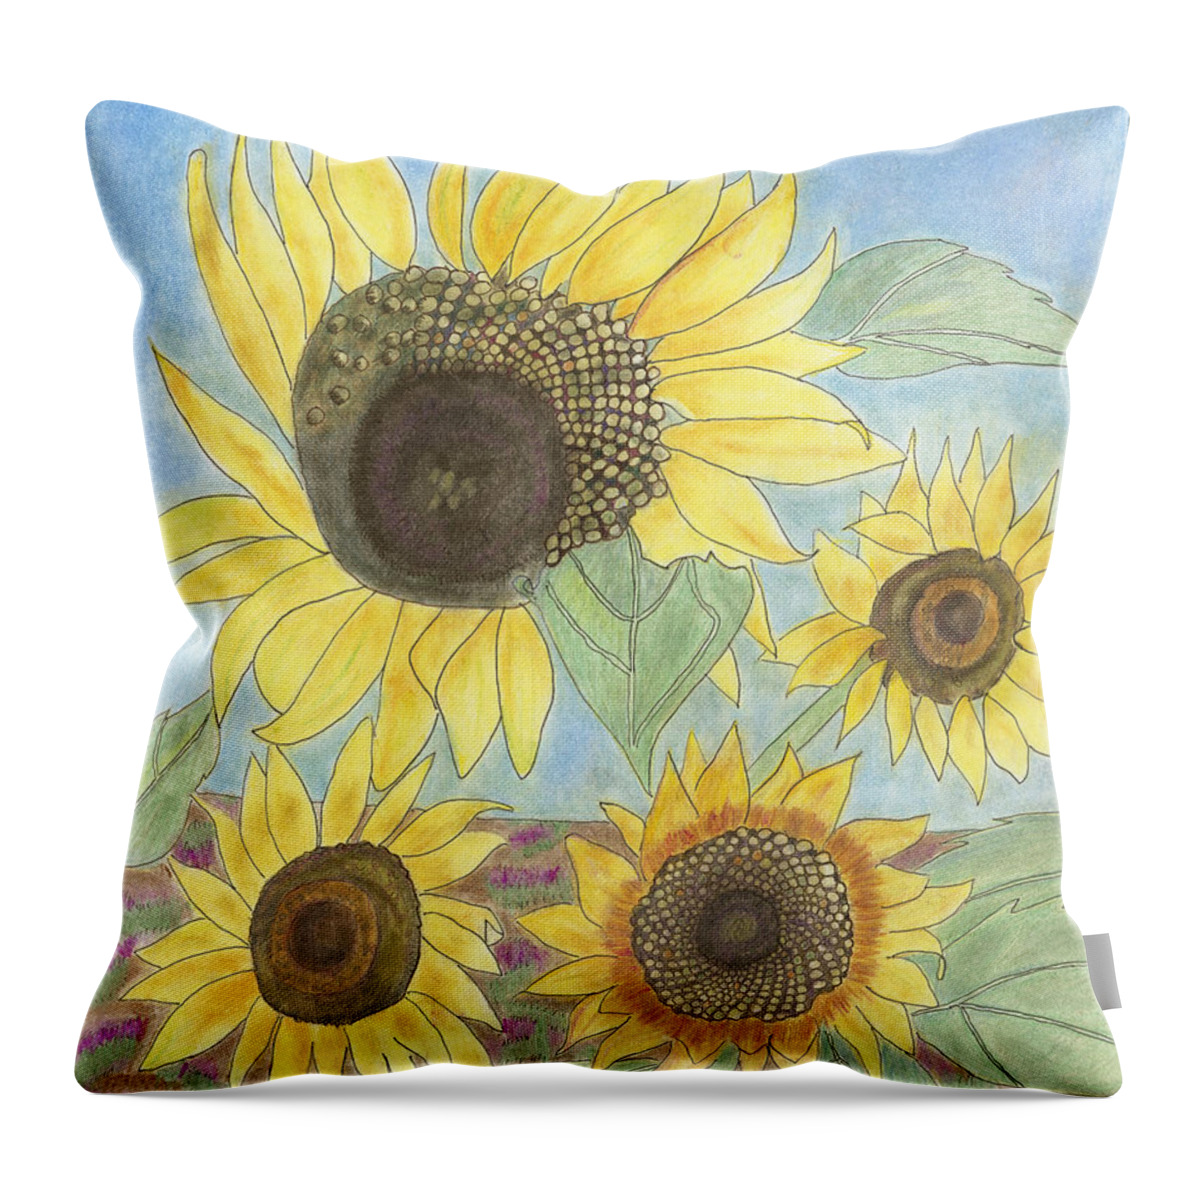 Sunflowers Throw Pillow featuring the drawing Golden Quartet by Arlene Crafton